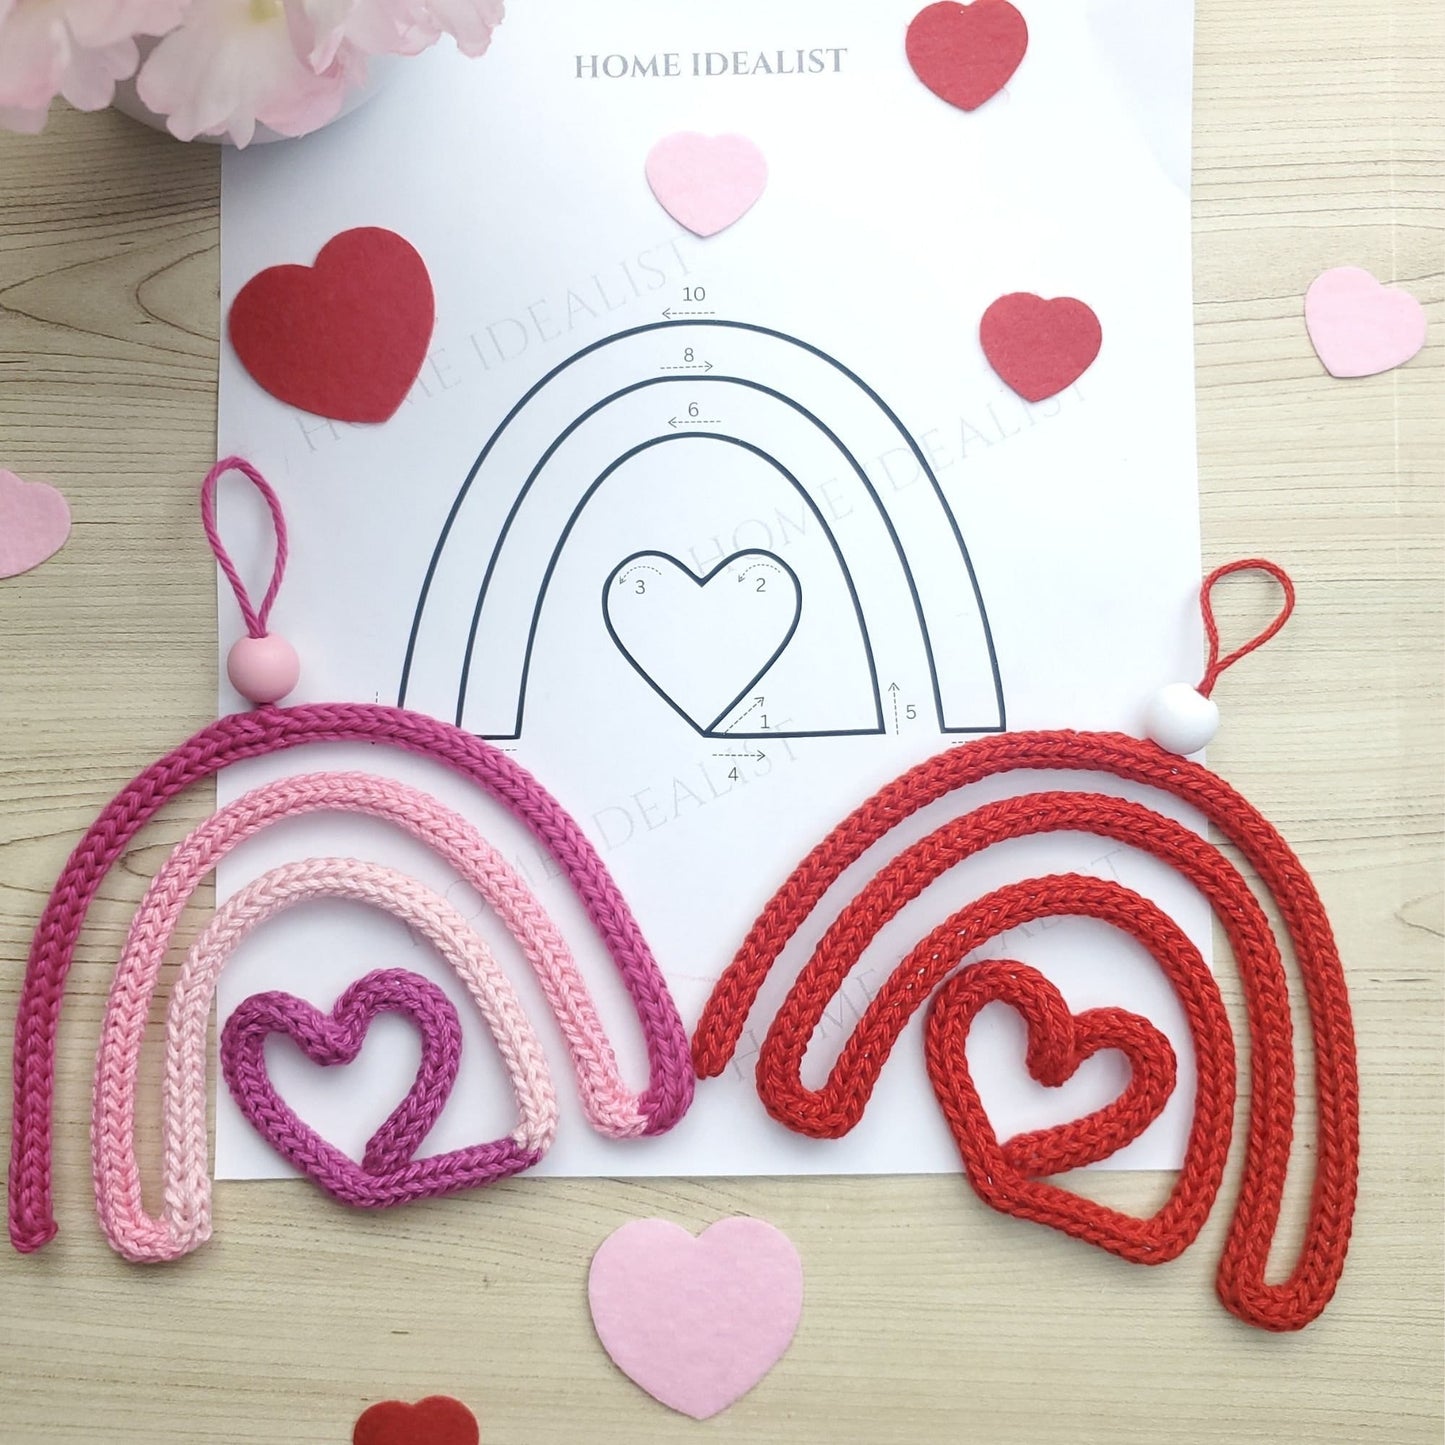 30 Valentine's Day Knitted Wire Patterns Bundle. Printable Templates for Knitted Wire. Tricotin Art. Instant Digital Download.